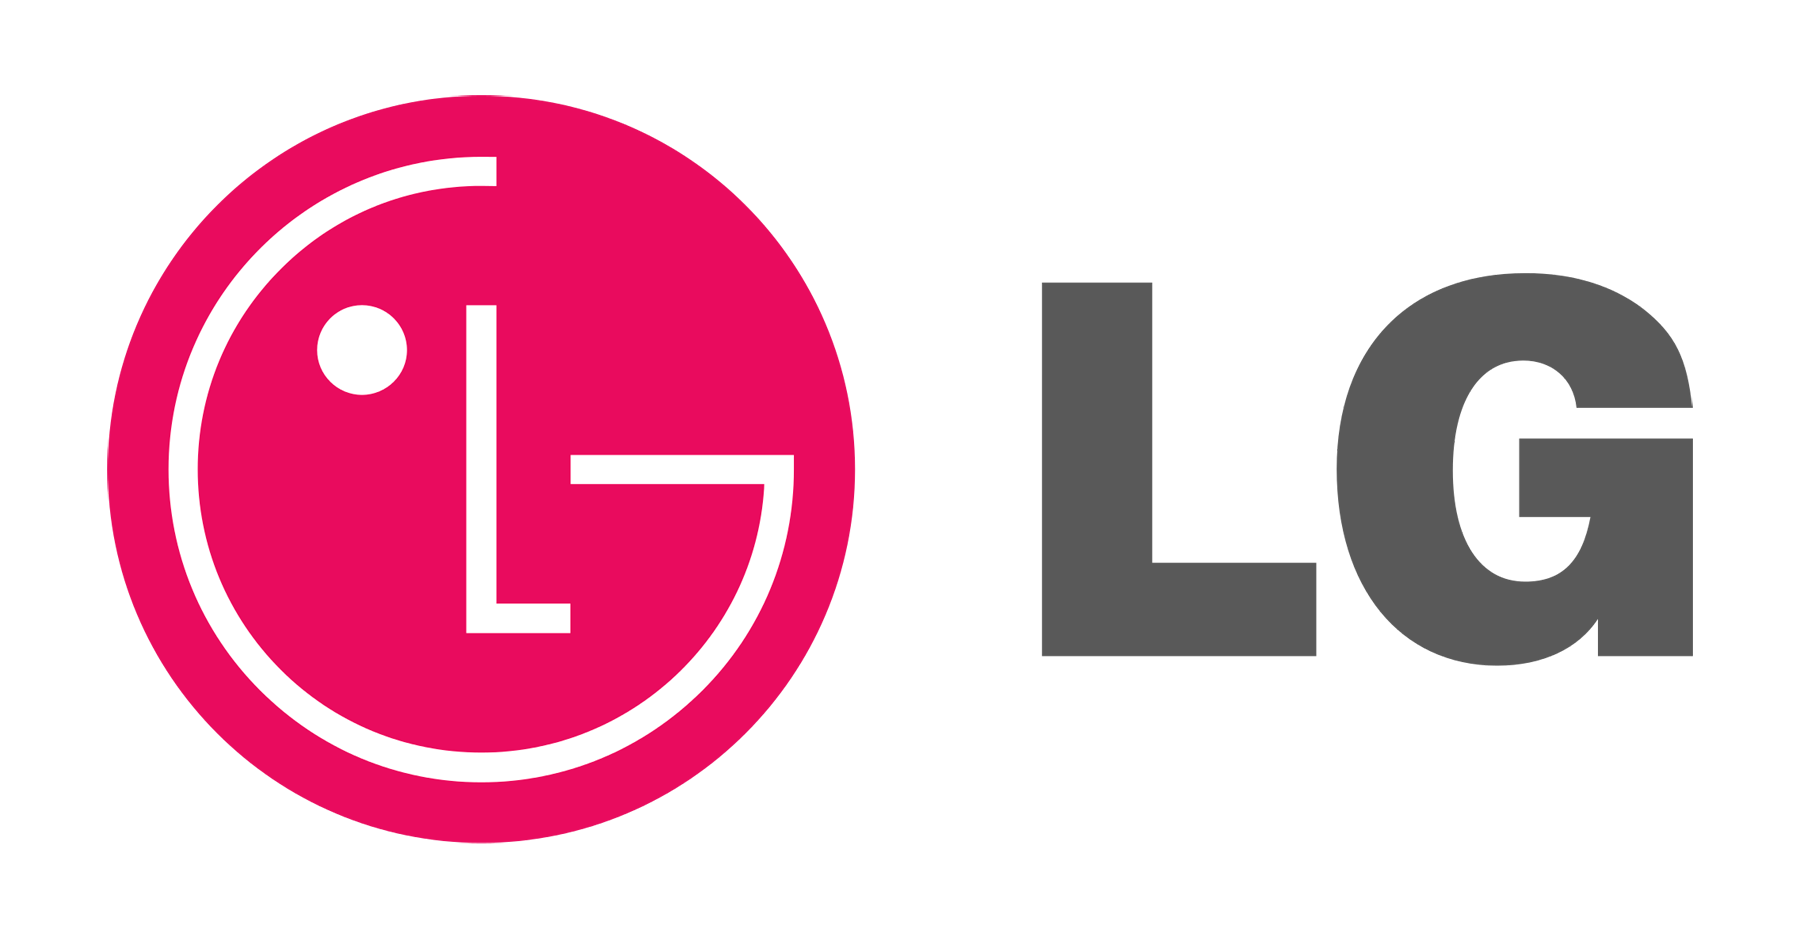 The lg logo is a pink circle with the letter l on it.